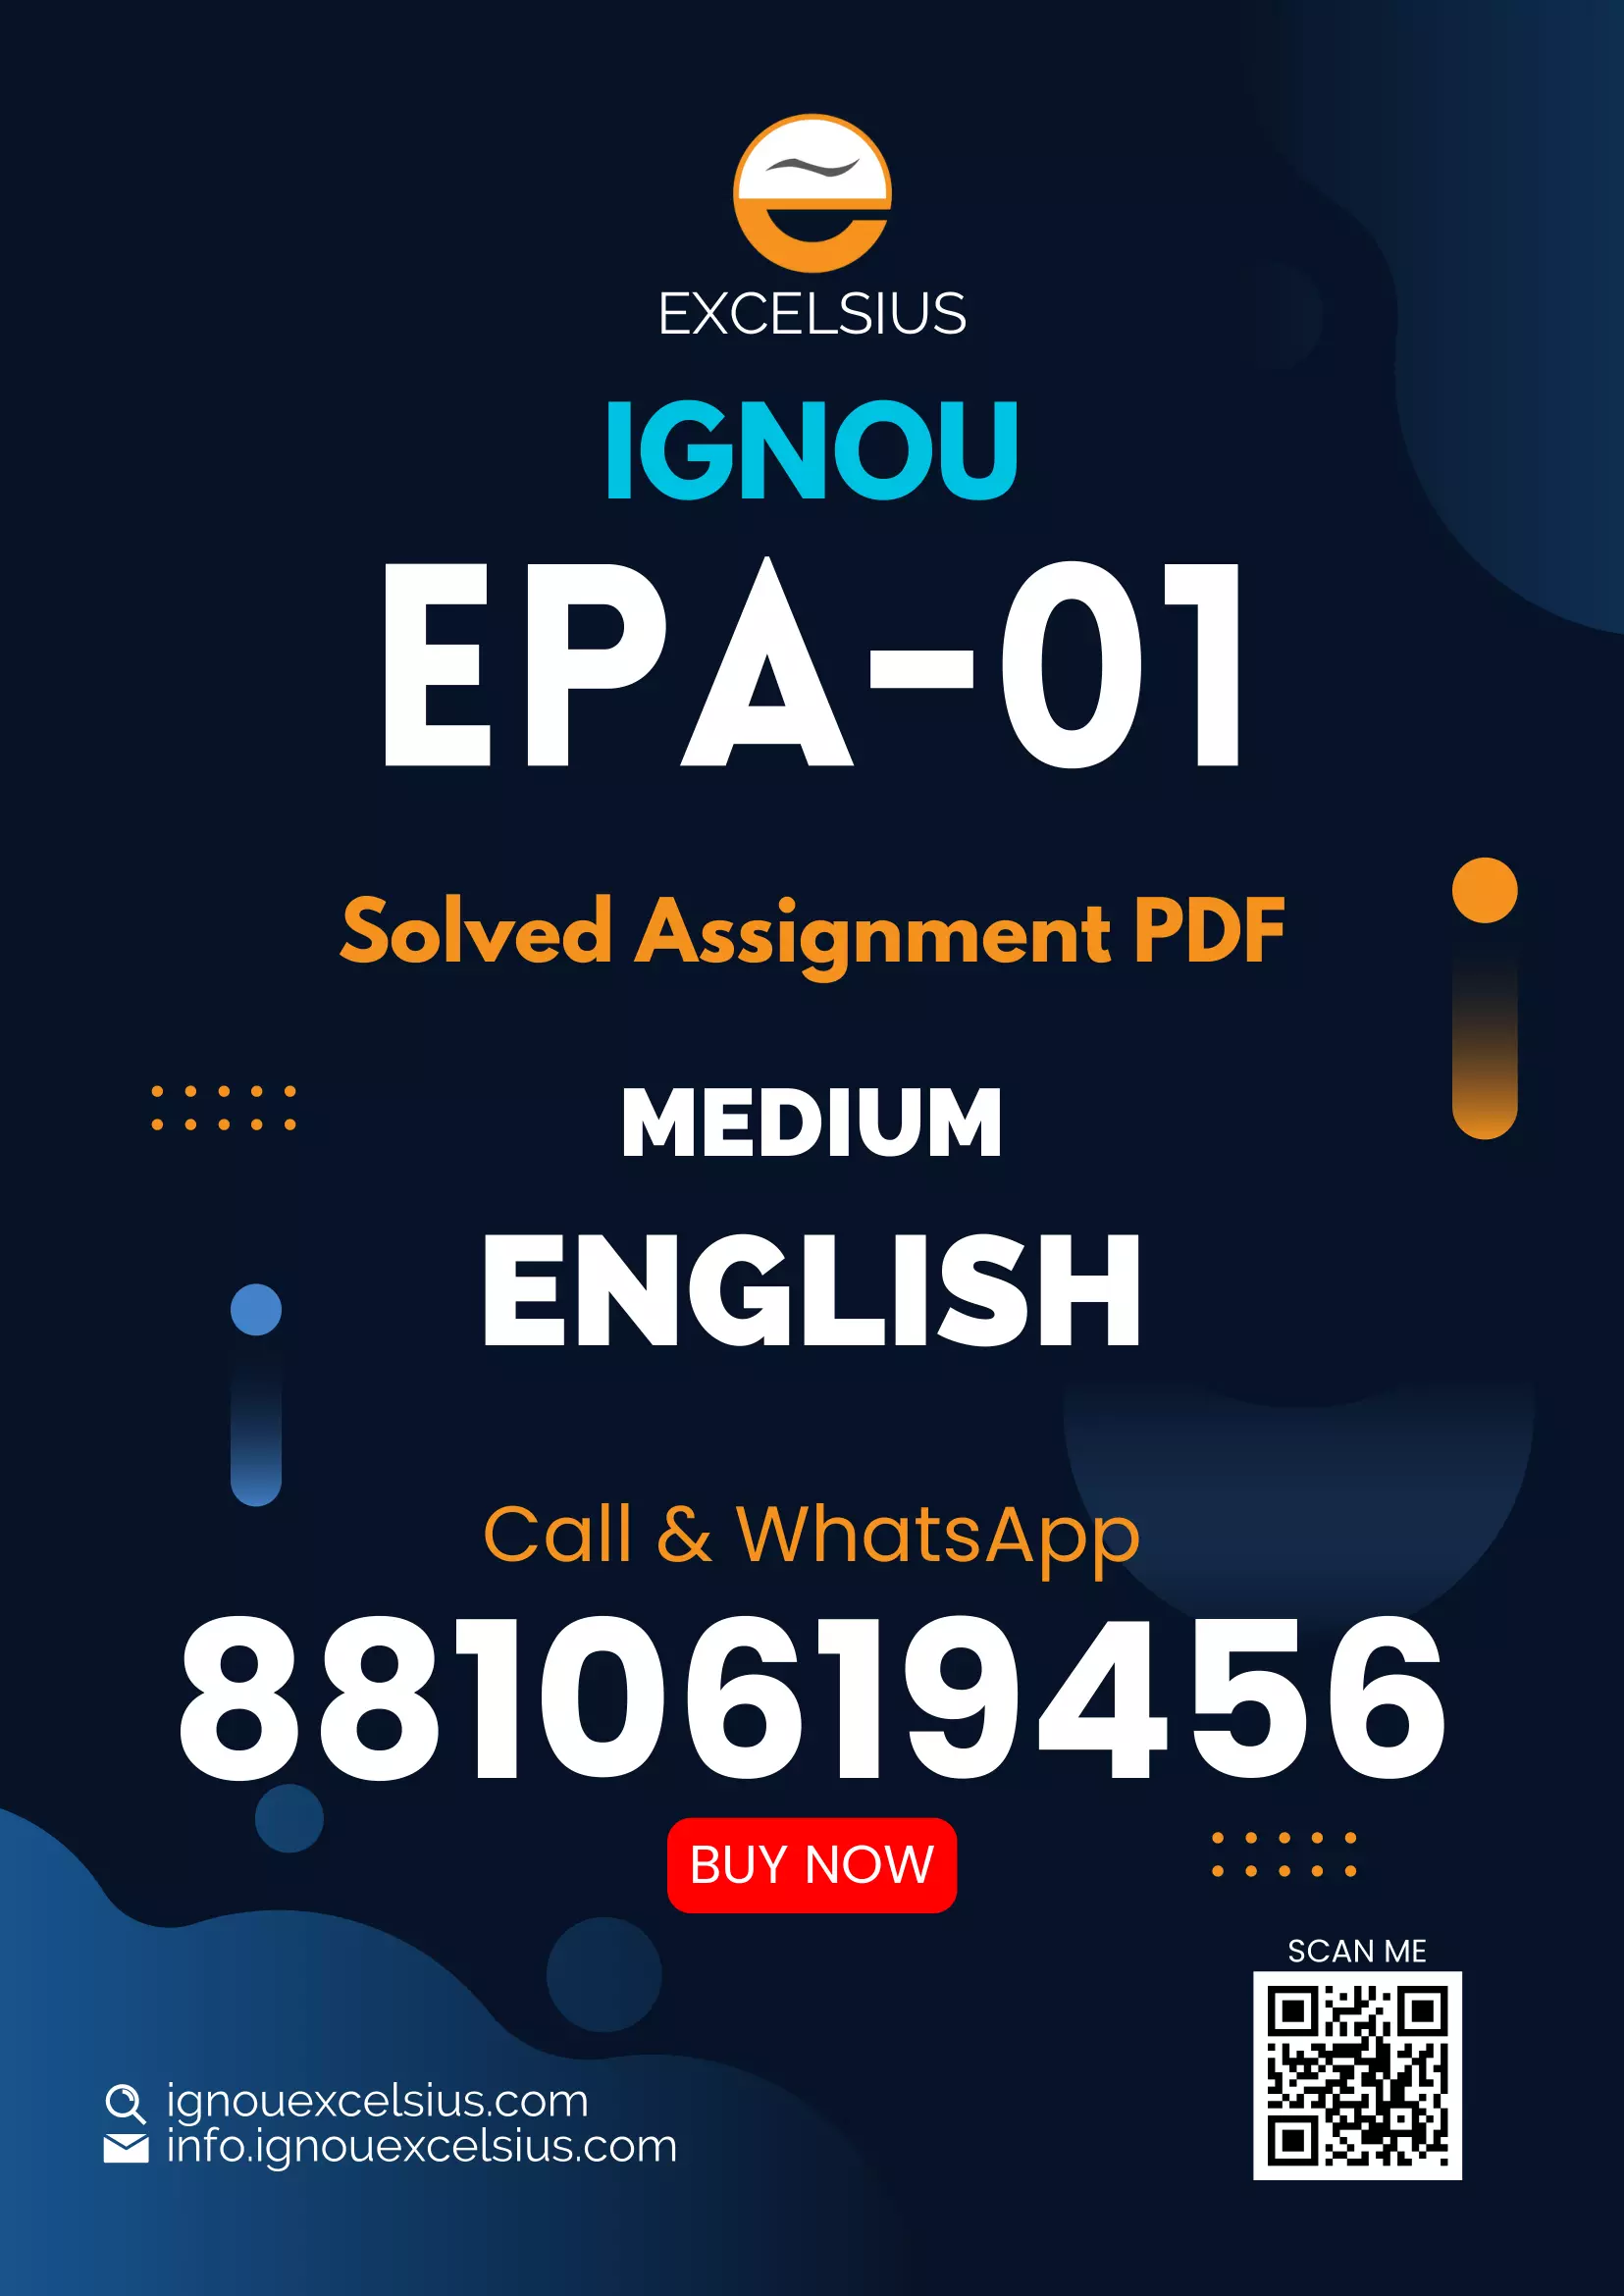 IGNOU EPA-01 - Administrative Theory, Latest Solved Assignment -July 2022 - January 2023